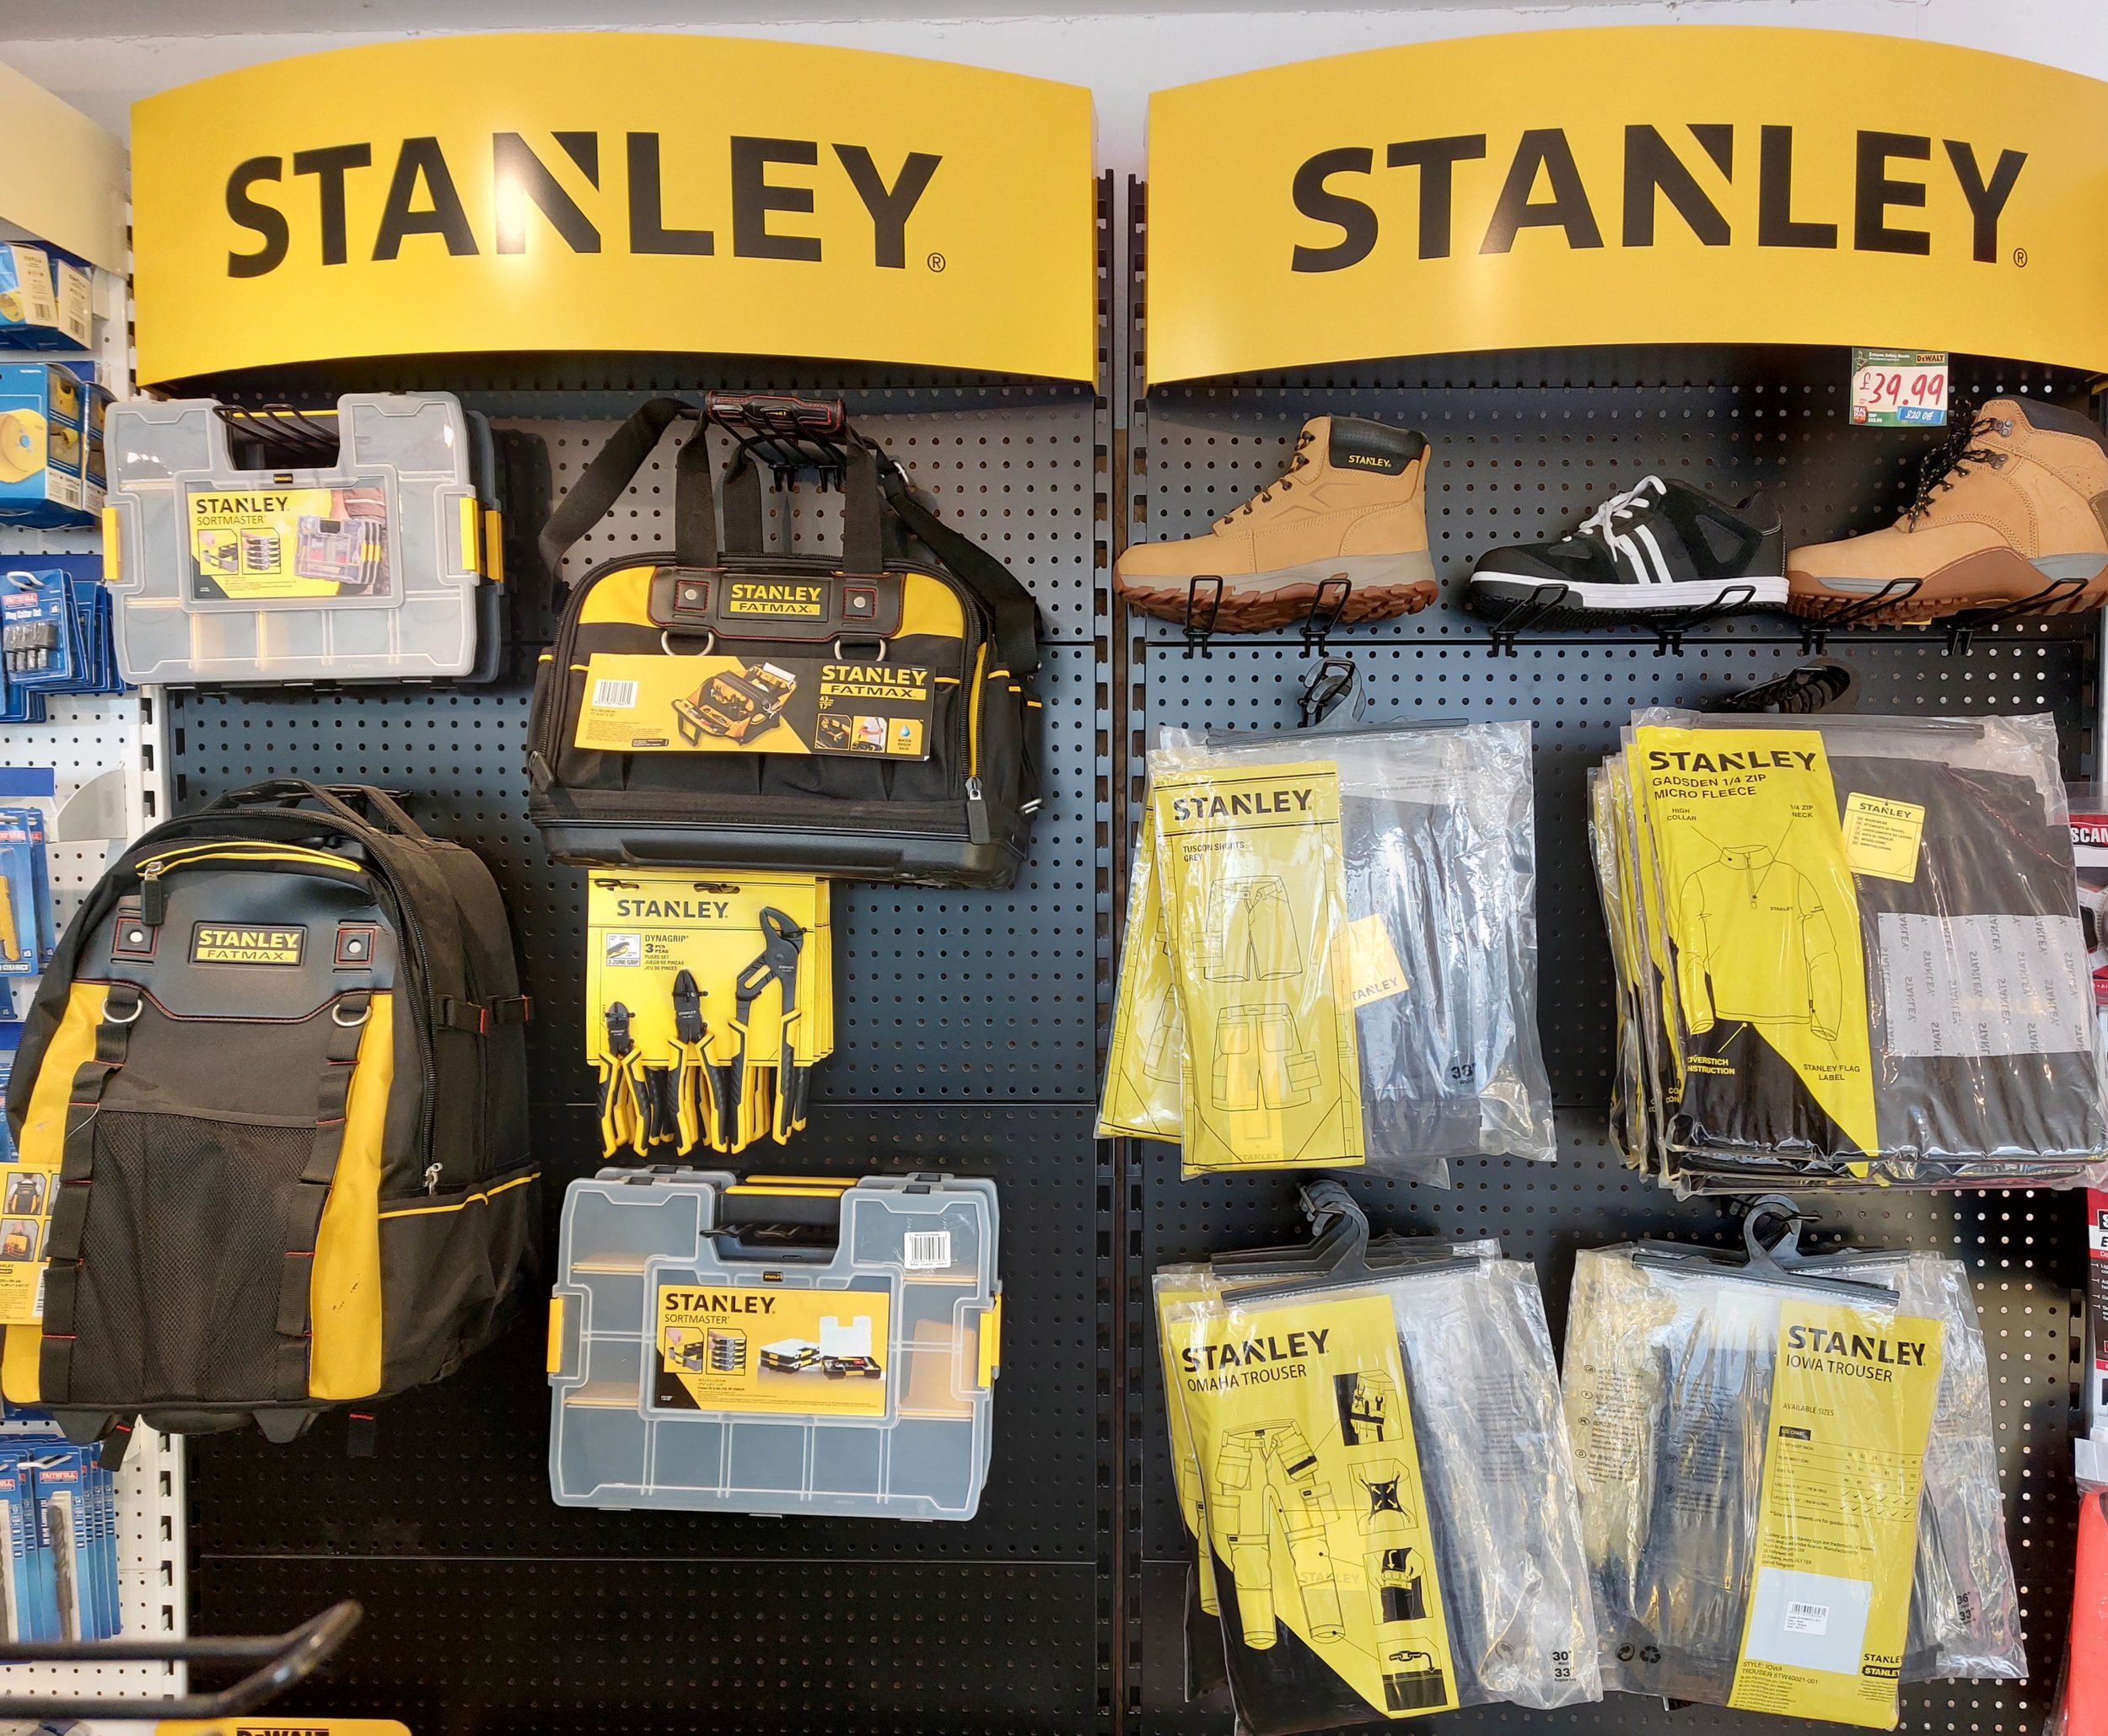  Stanley workwear and PPE supplier in Barton, Cambridge. 